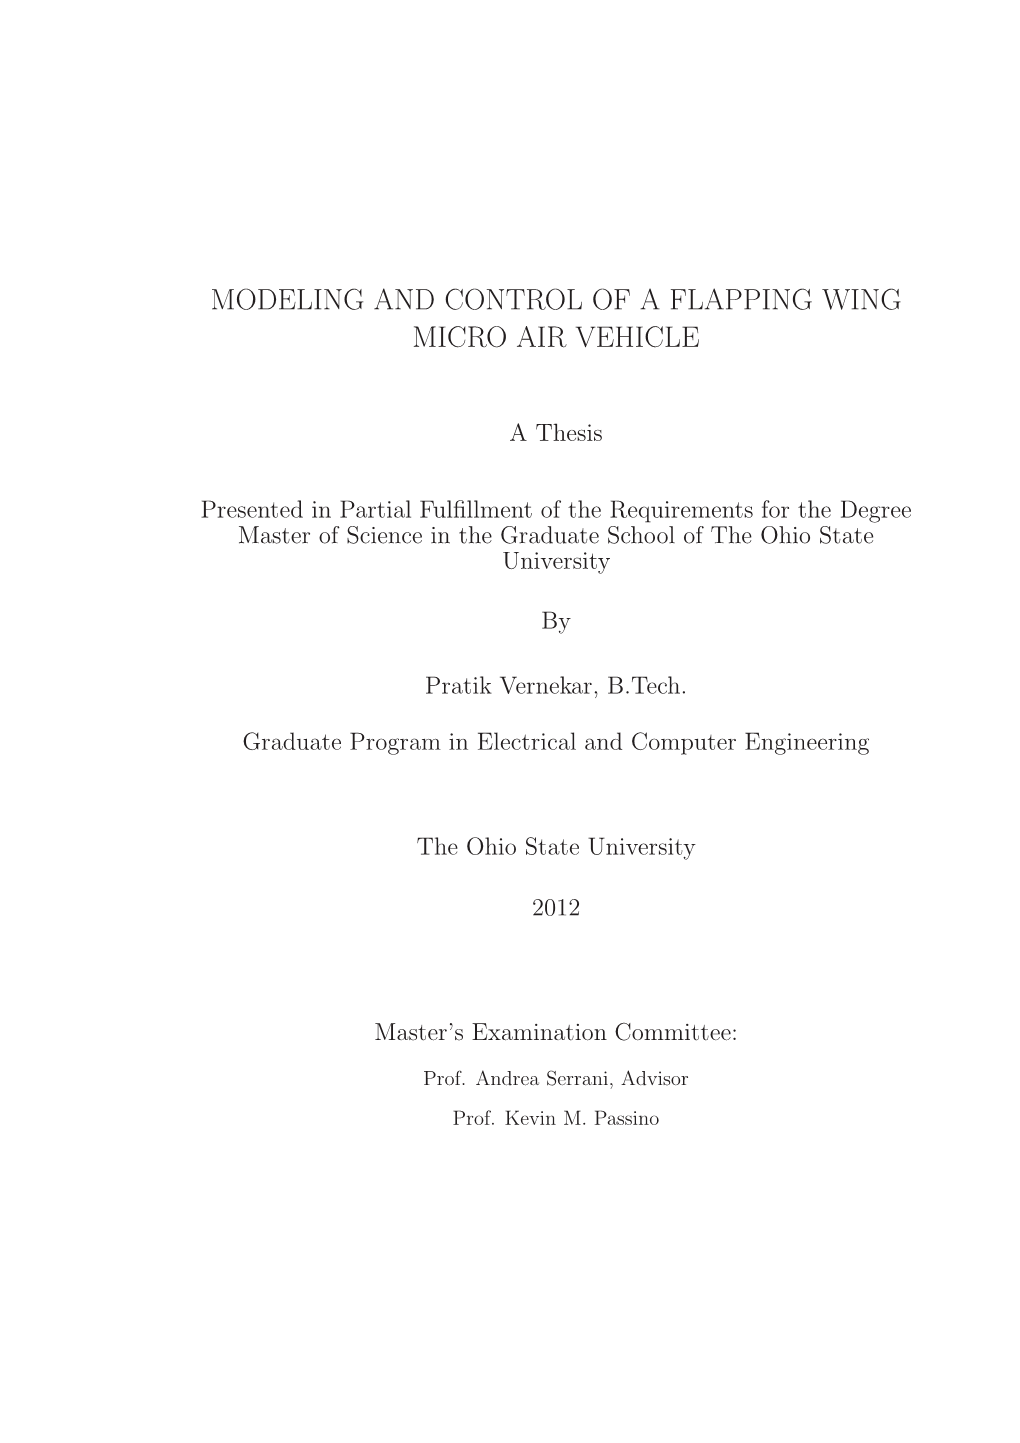 Modeling and Control of a Flapping Wing Micro Air Vehicle